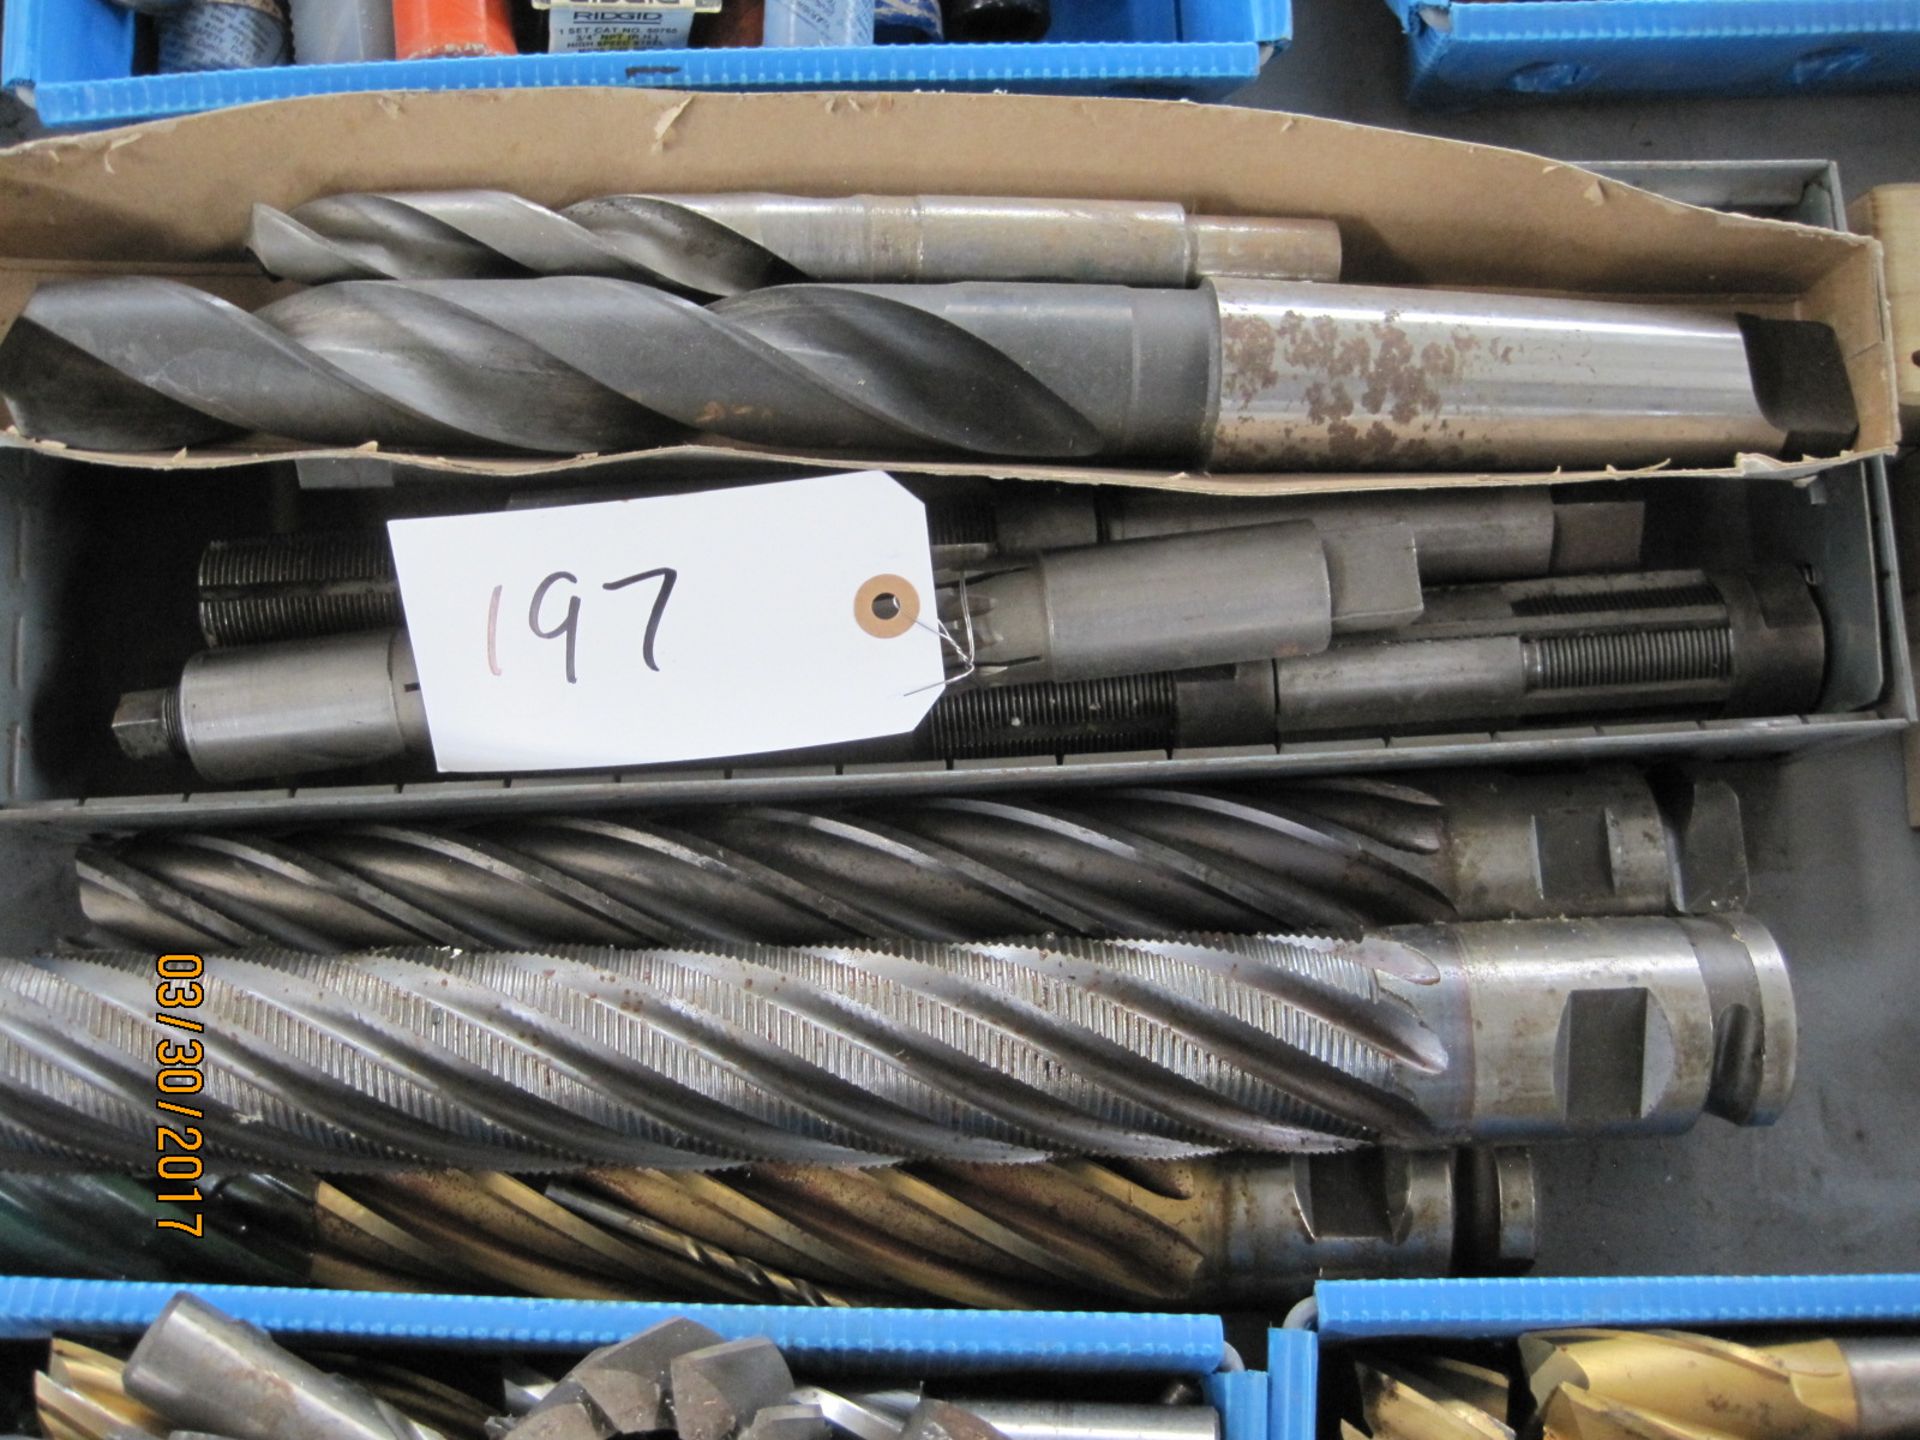 Large mills, drill bits and adjustable reamers